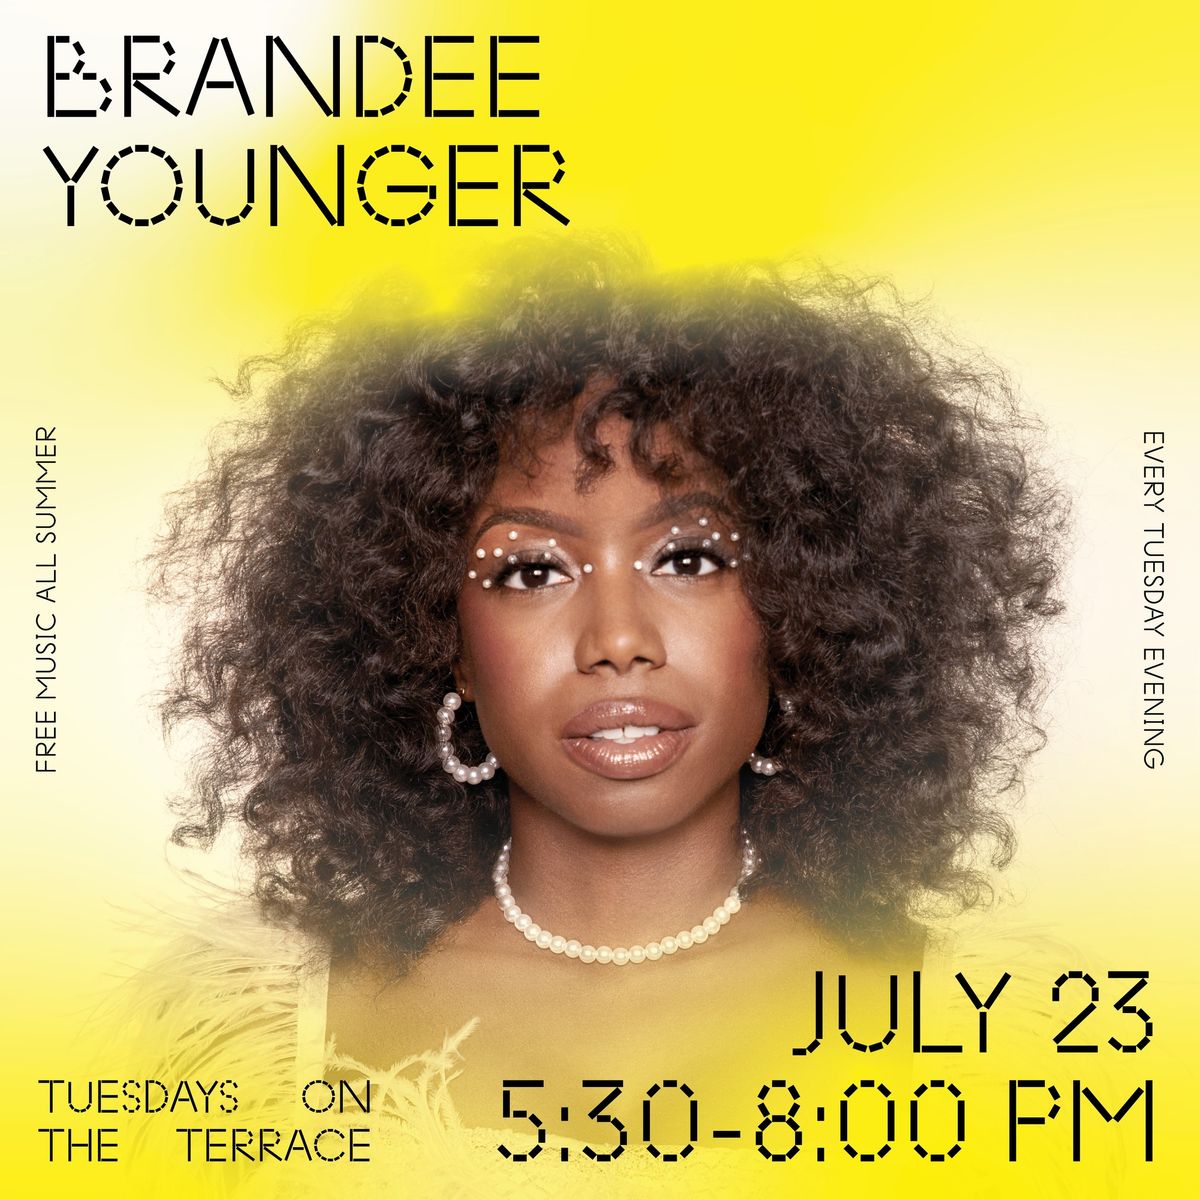 Tuesdays on the Terrace | A Celebration of Alice Coltrane with Brandee Younger